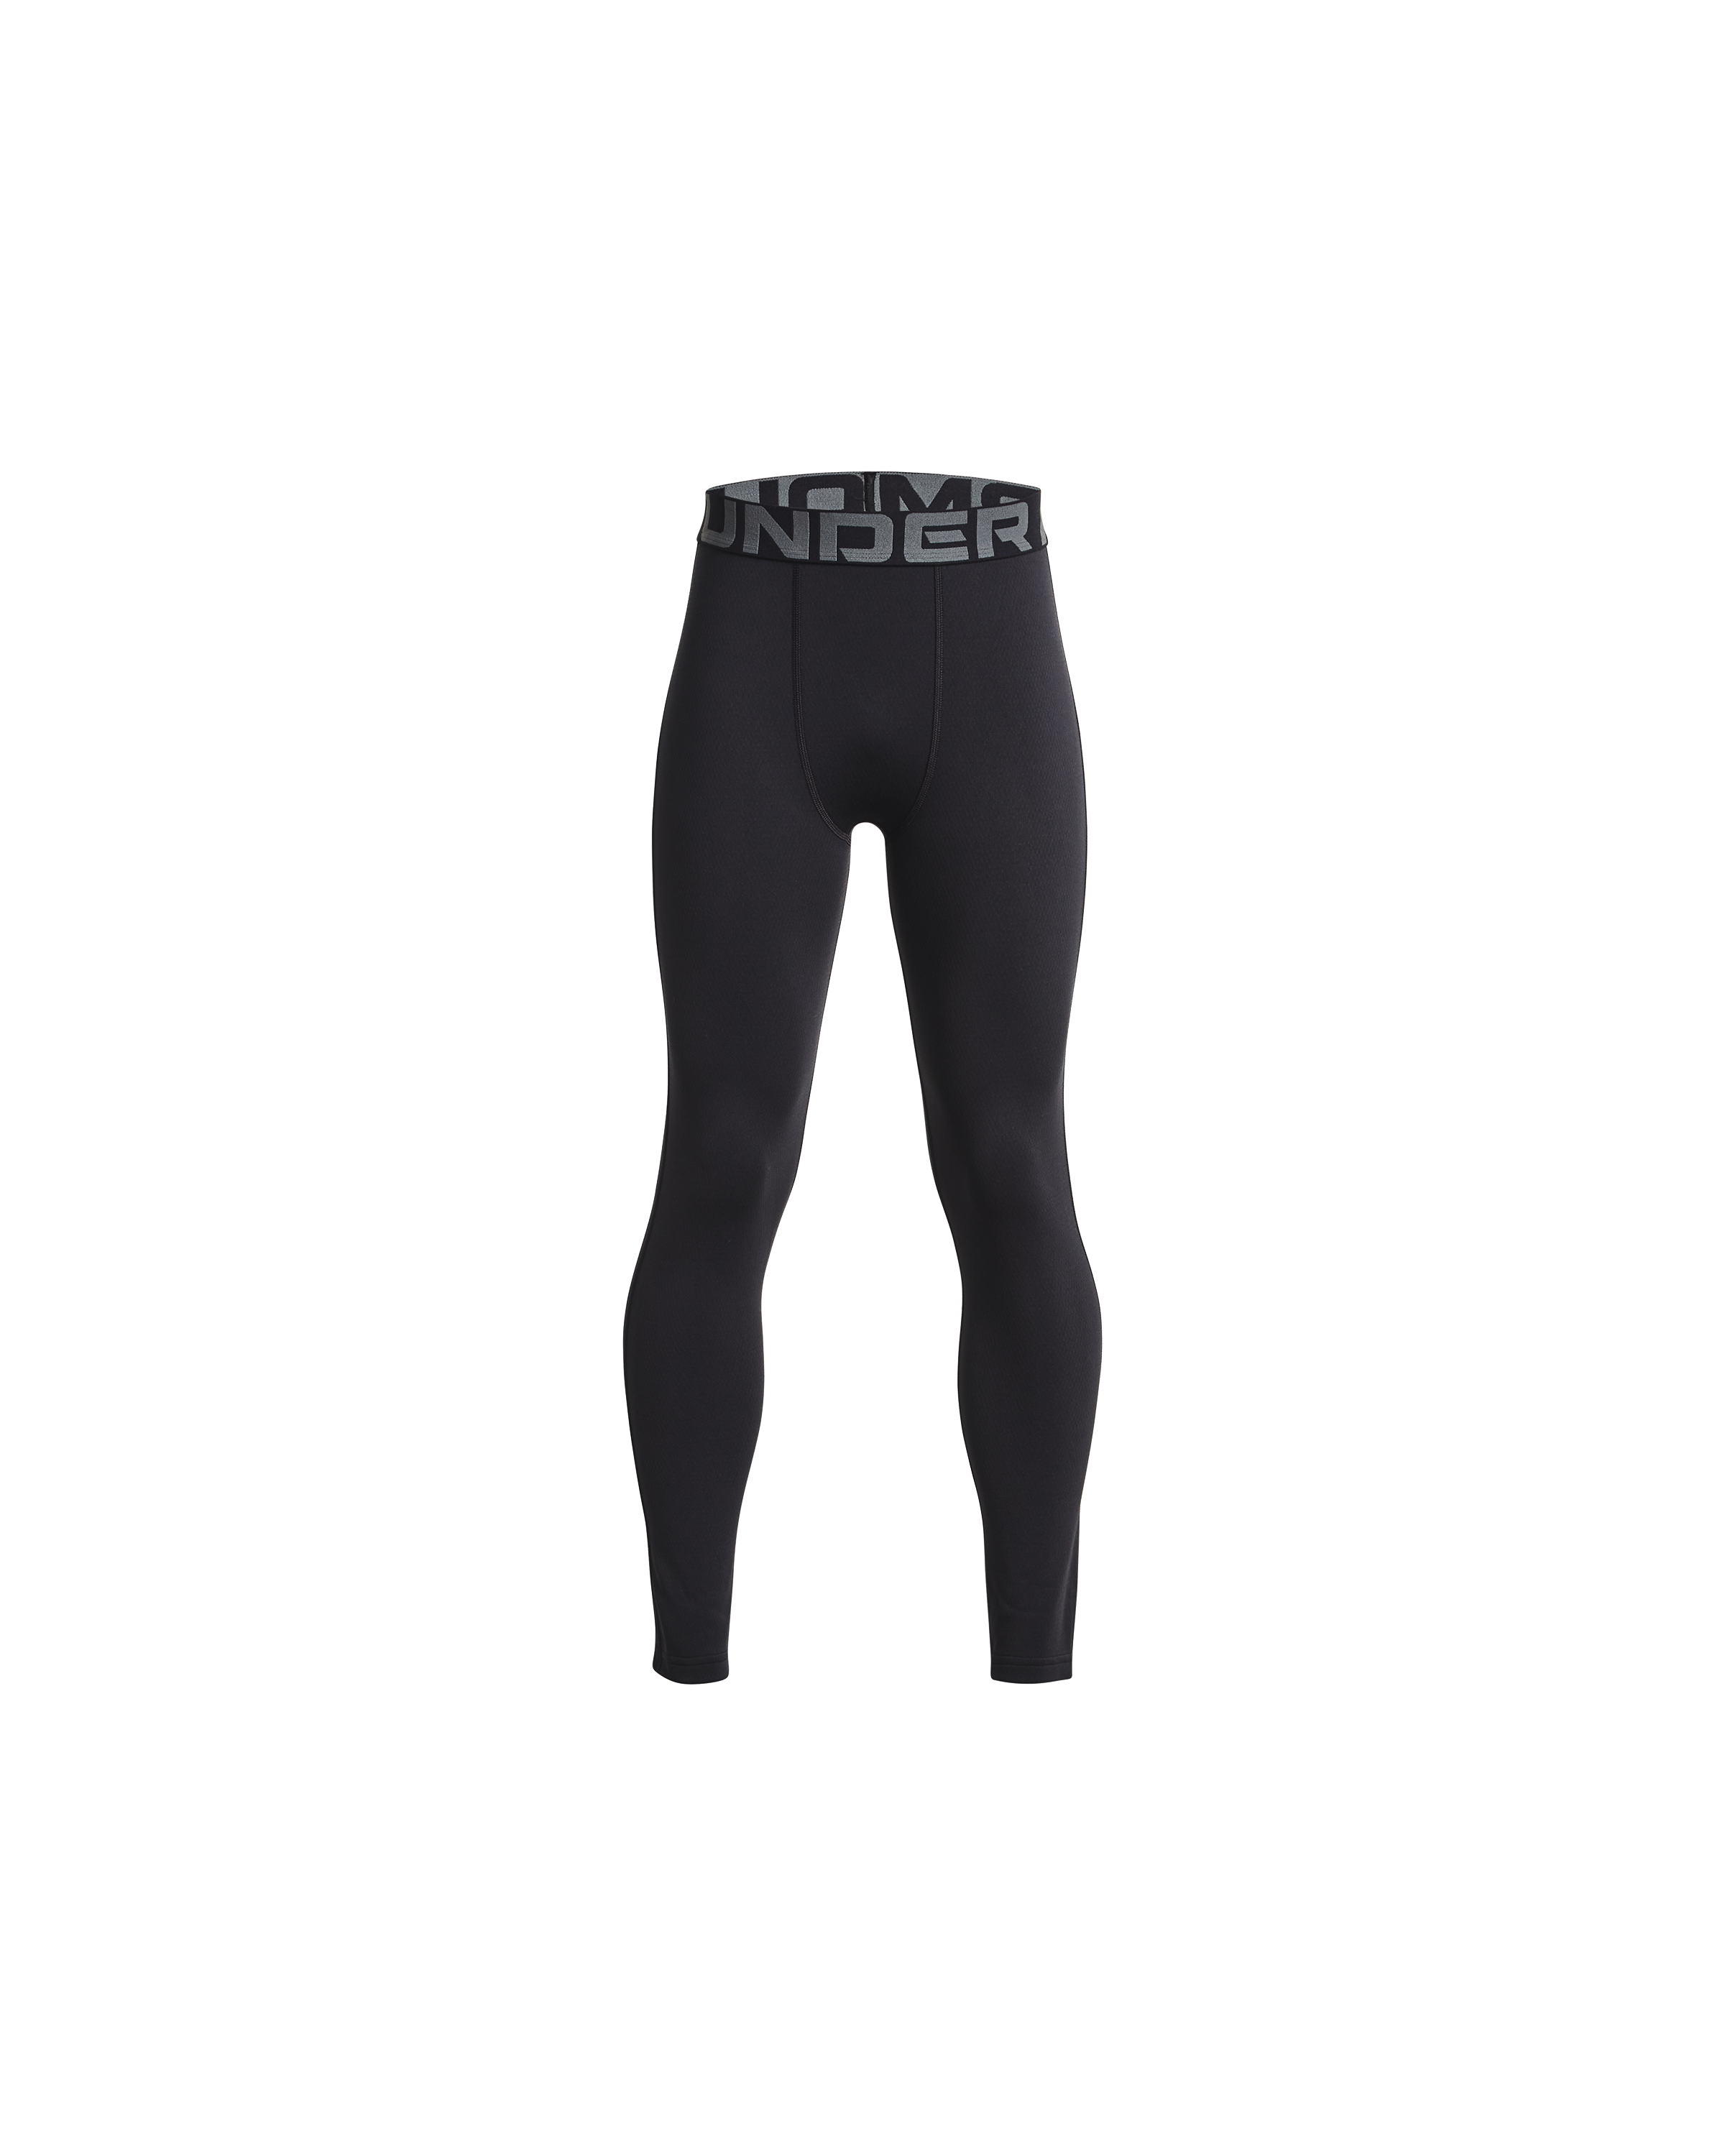 Boys' Packaged Base 2.0 Legging from Under Armour